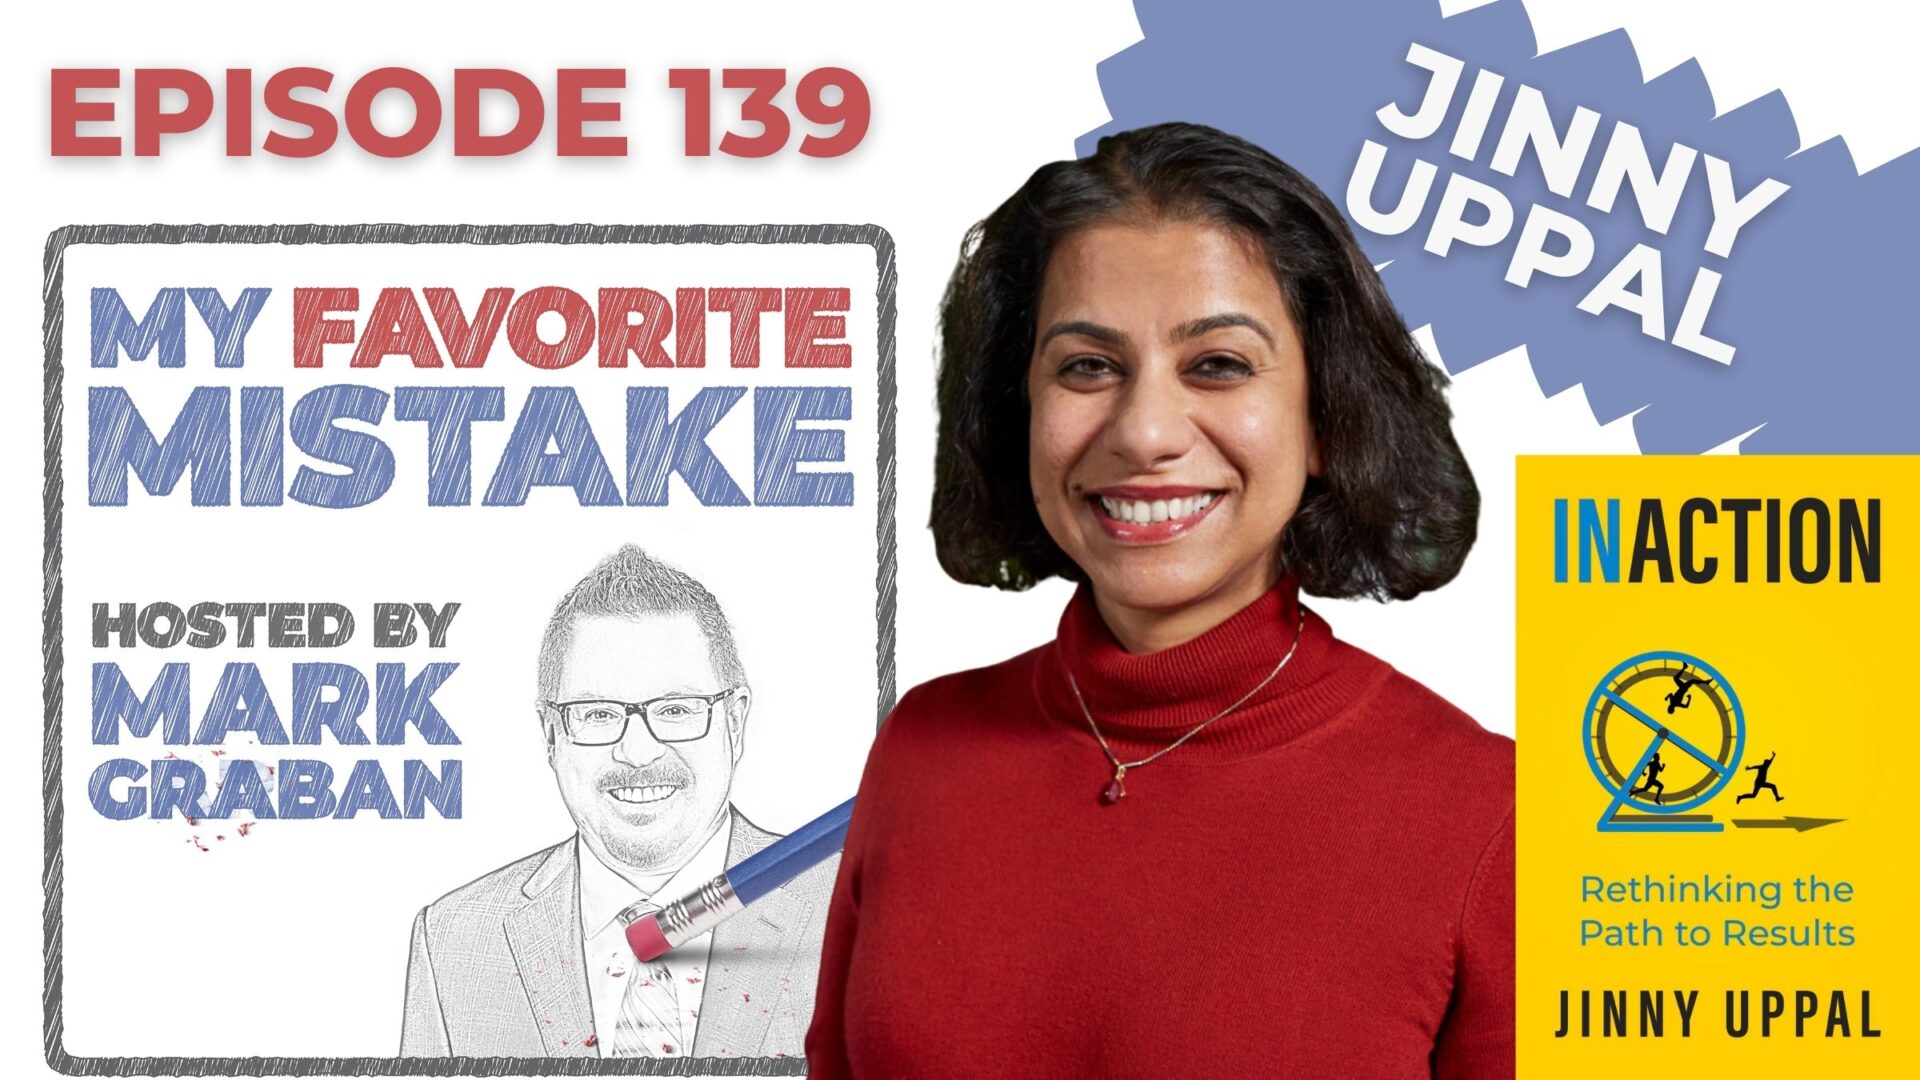 Technology & Business Leader Jinny Uppal on the Mistake of Going Too Fast — “In/Action”